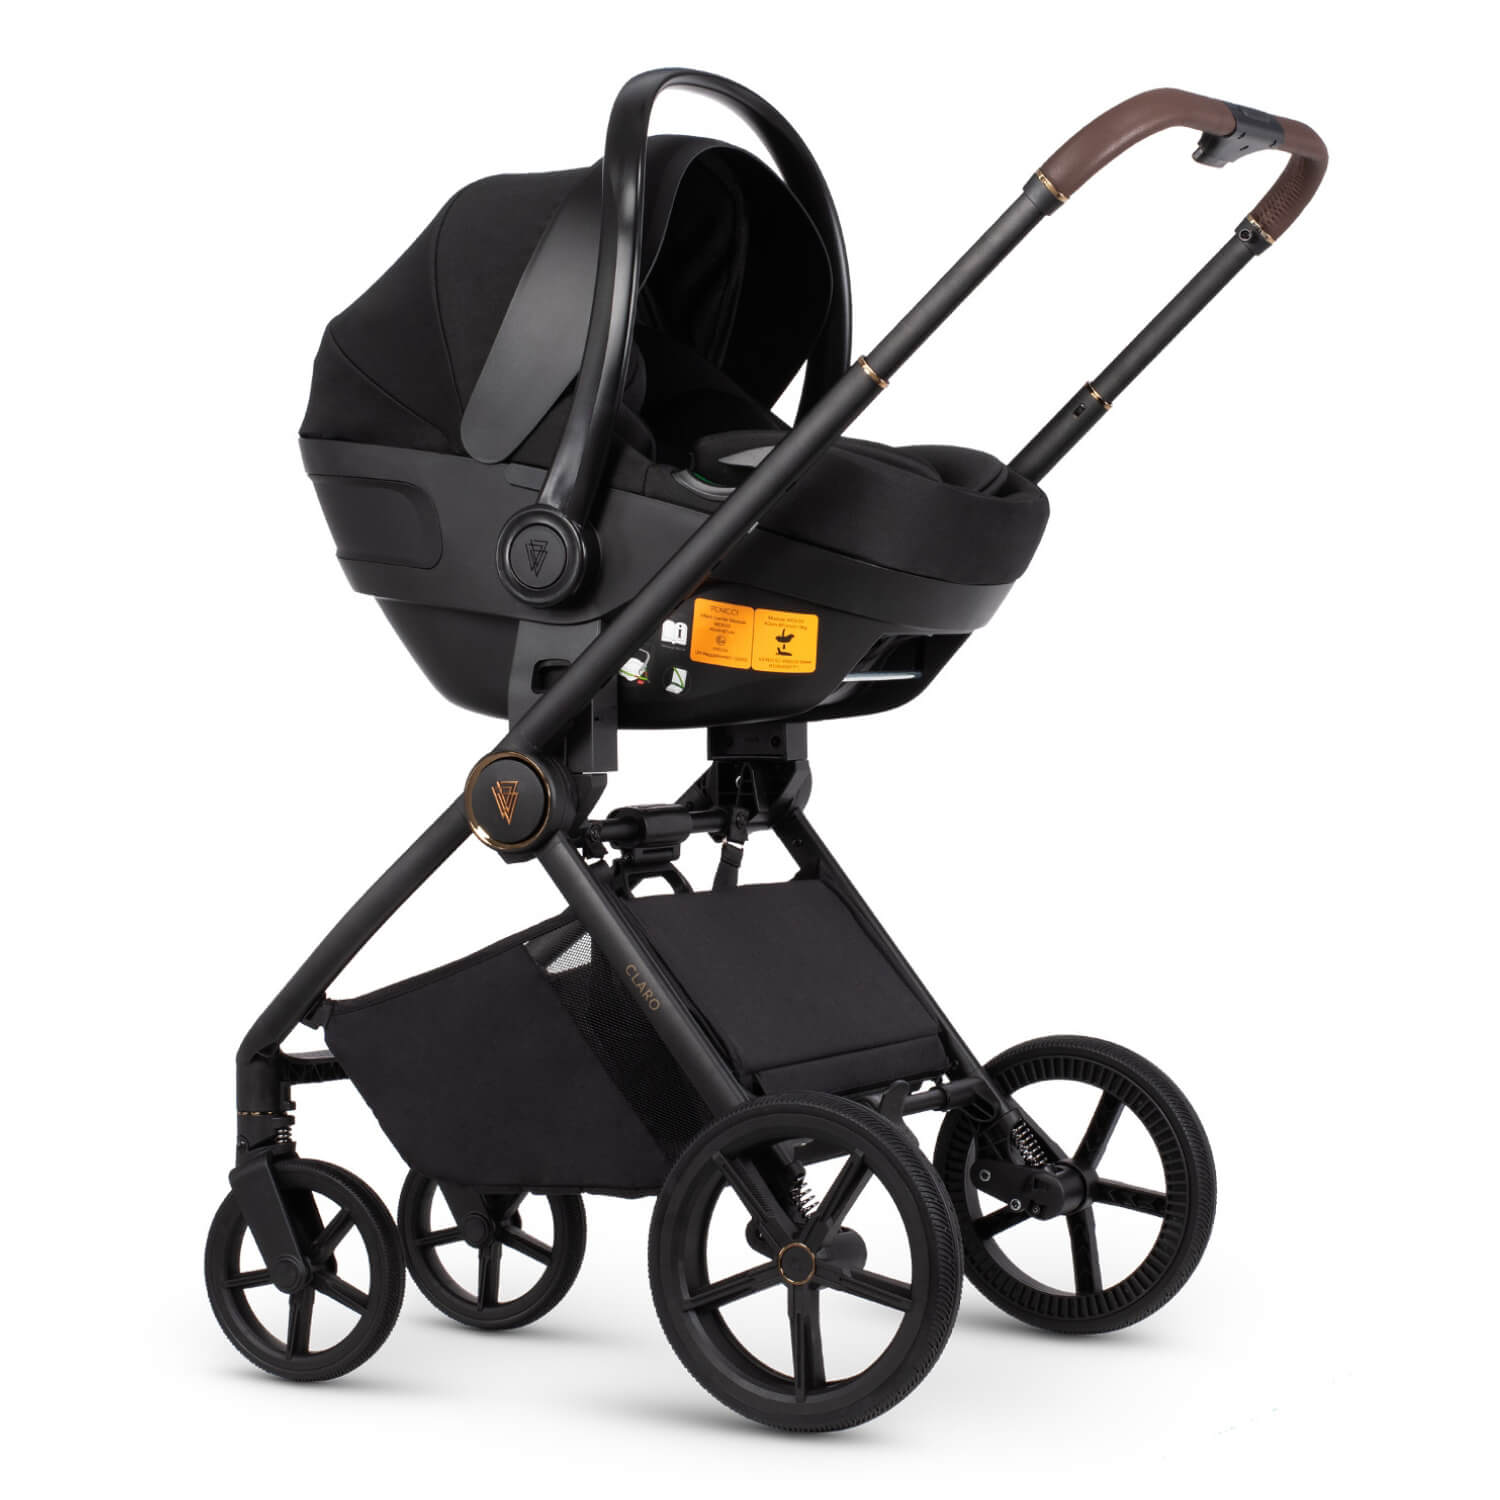 Venicci Claro 3-in-1 Travel System with car seat